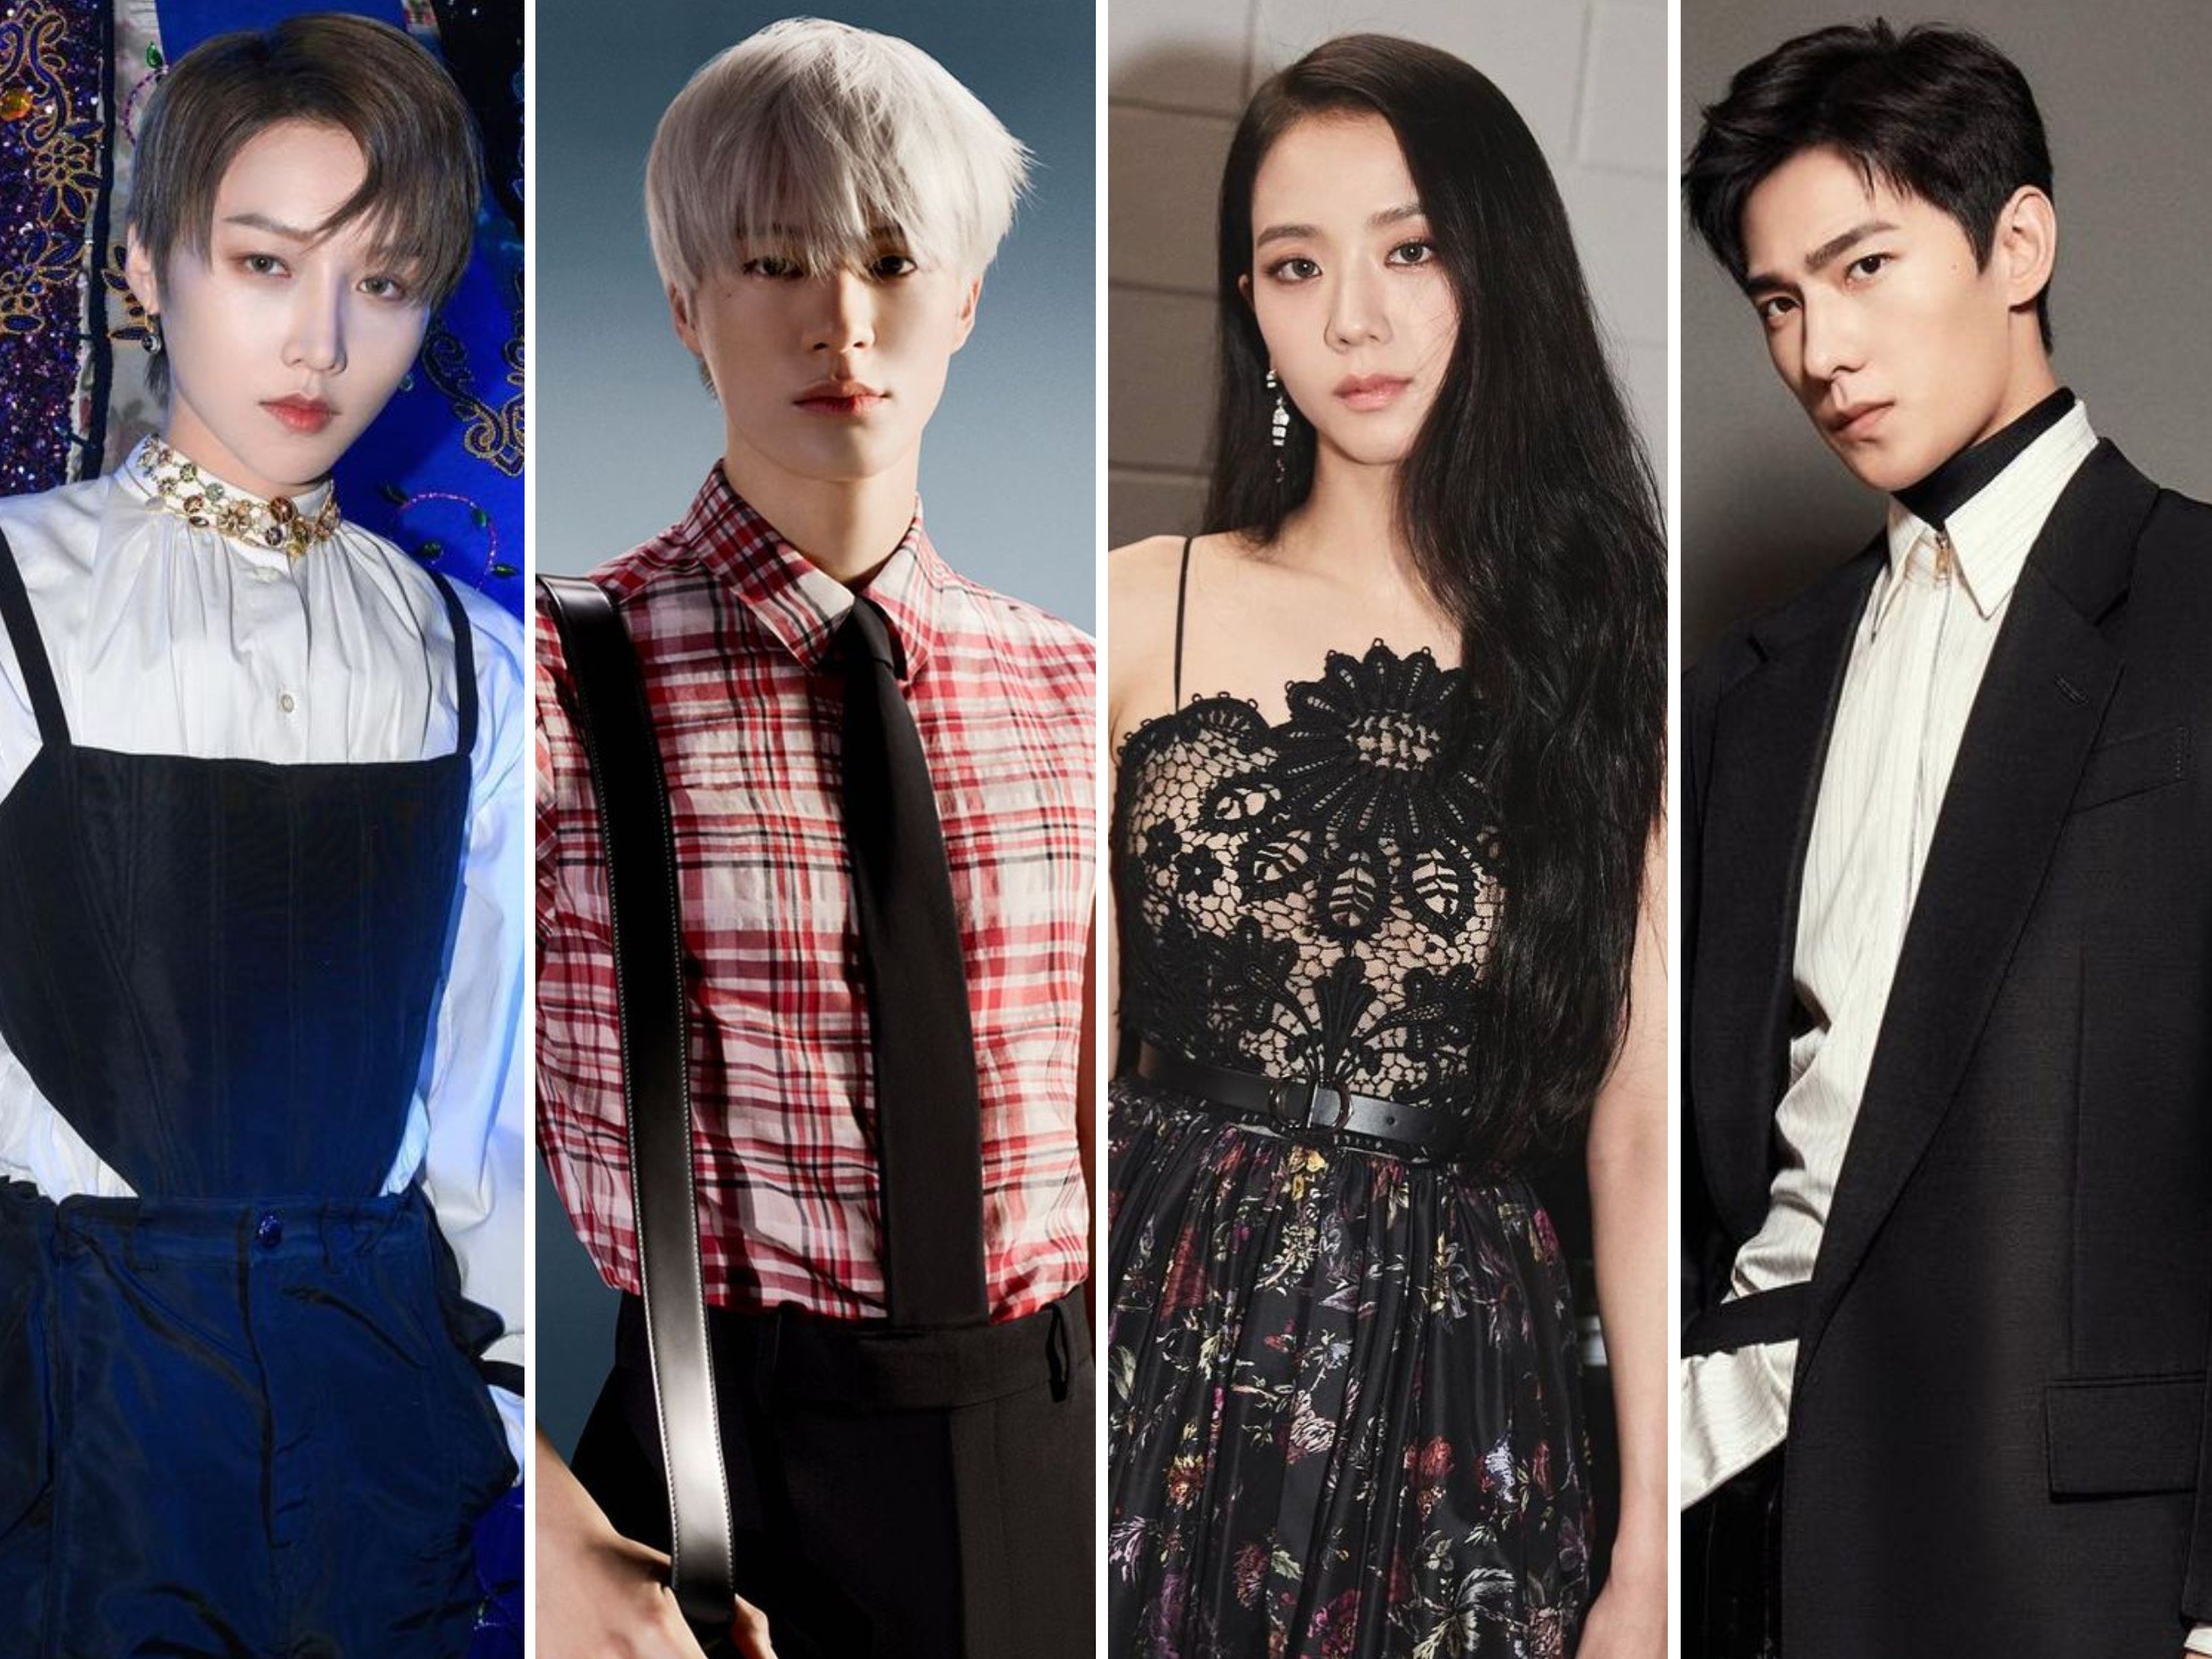 7 new Asian celebrity brand ambassadors named this summer, from Blackpink's  Jisoo's and Xin Liu's latest Dior Beauty campaigns and Yang Yang's  Valentino gig to NCT's Jeno for Ferragamo